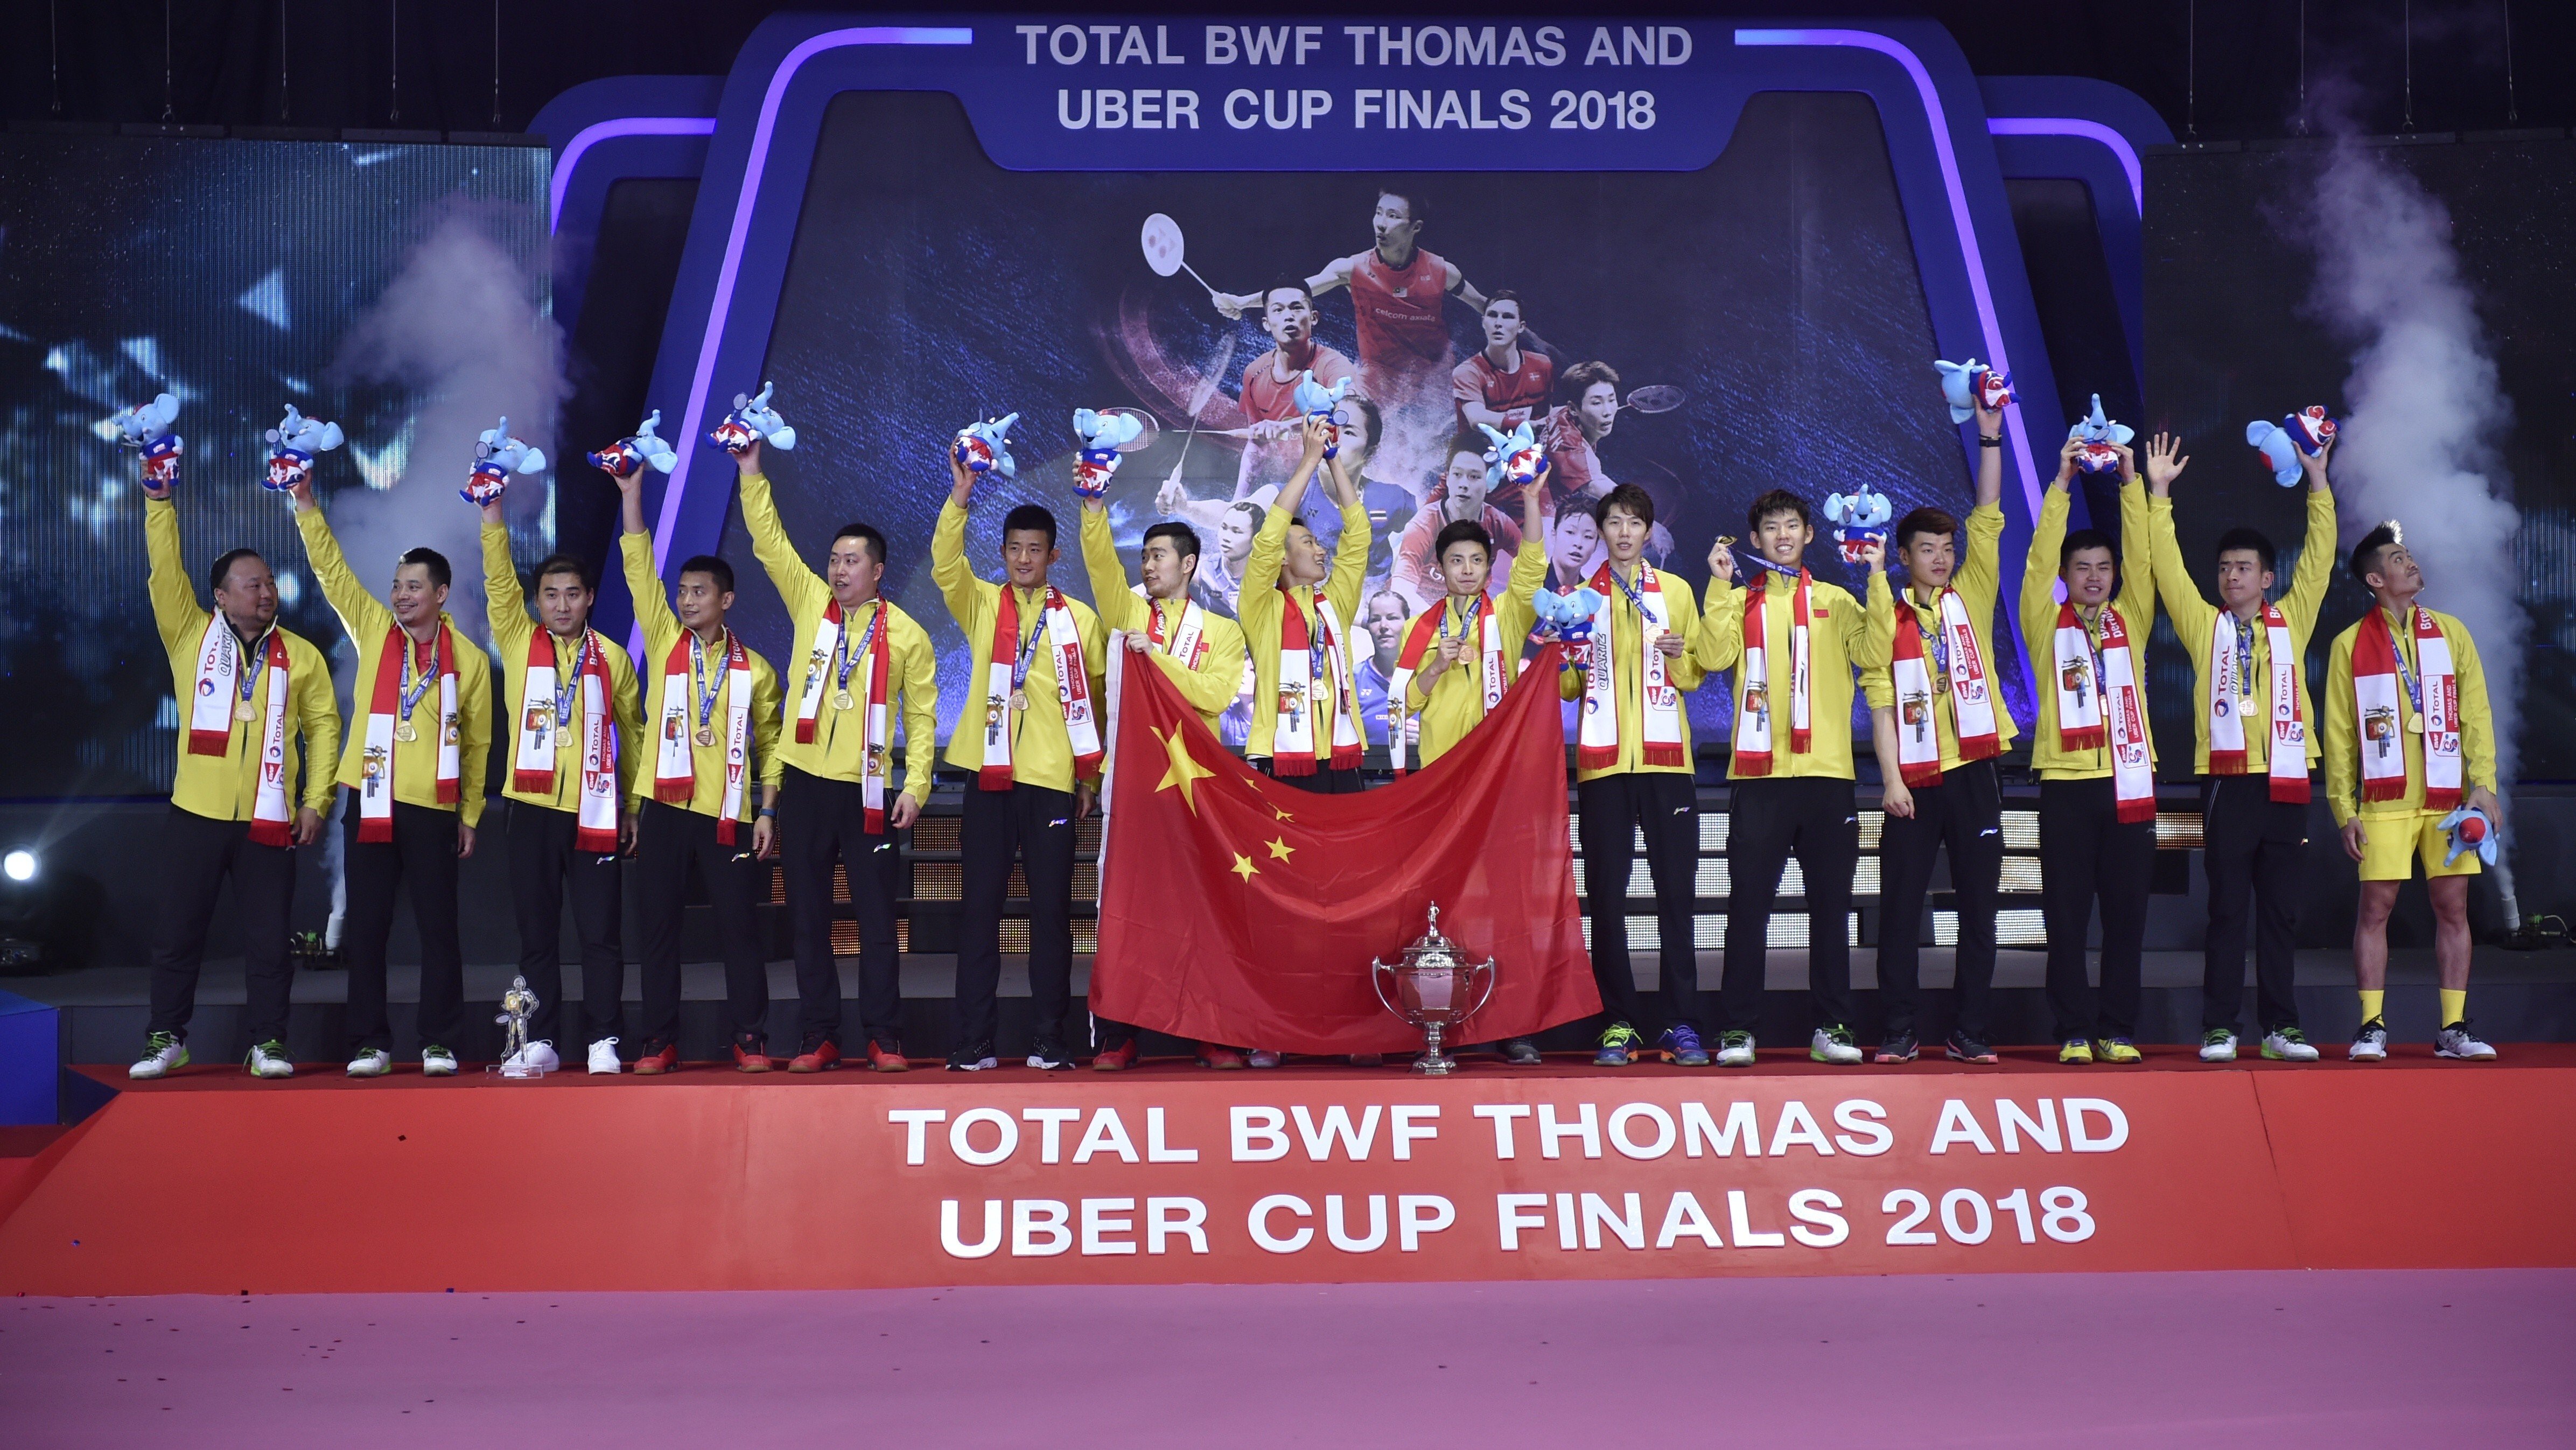 Thomas and Uber Cup China, Indonesia, Malaysia learn fates after 2020 draw South China Morning Post